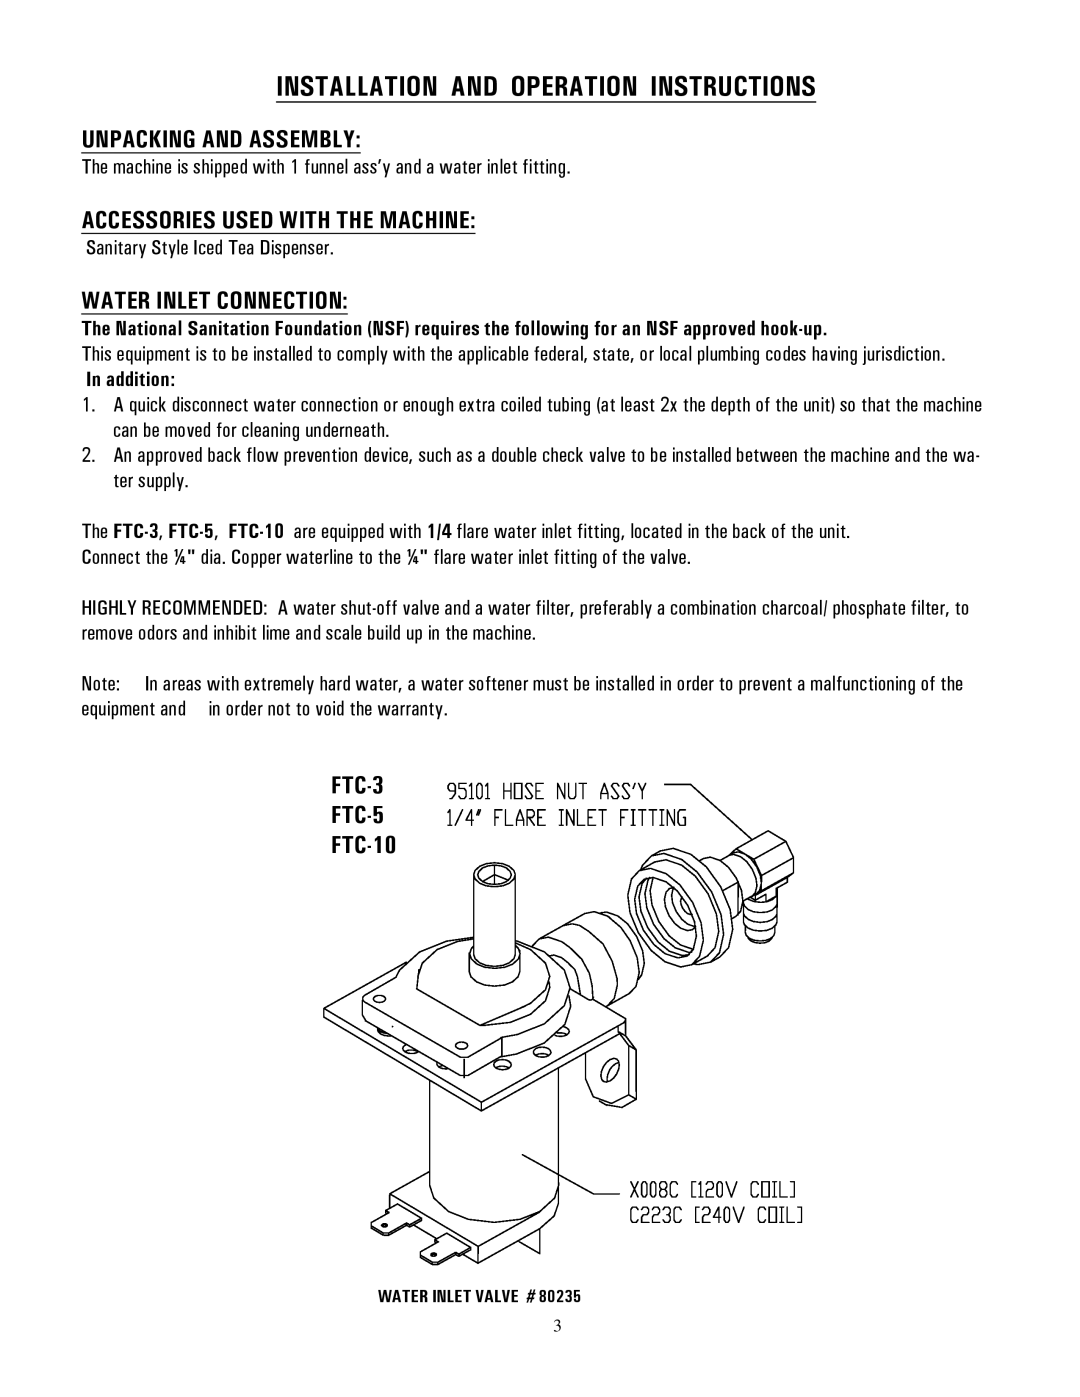 Cecilware FTC-10, FTC-5 Installation And Operation Instructions, Unpacking And Assembly, Accessories Used With The Machine 